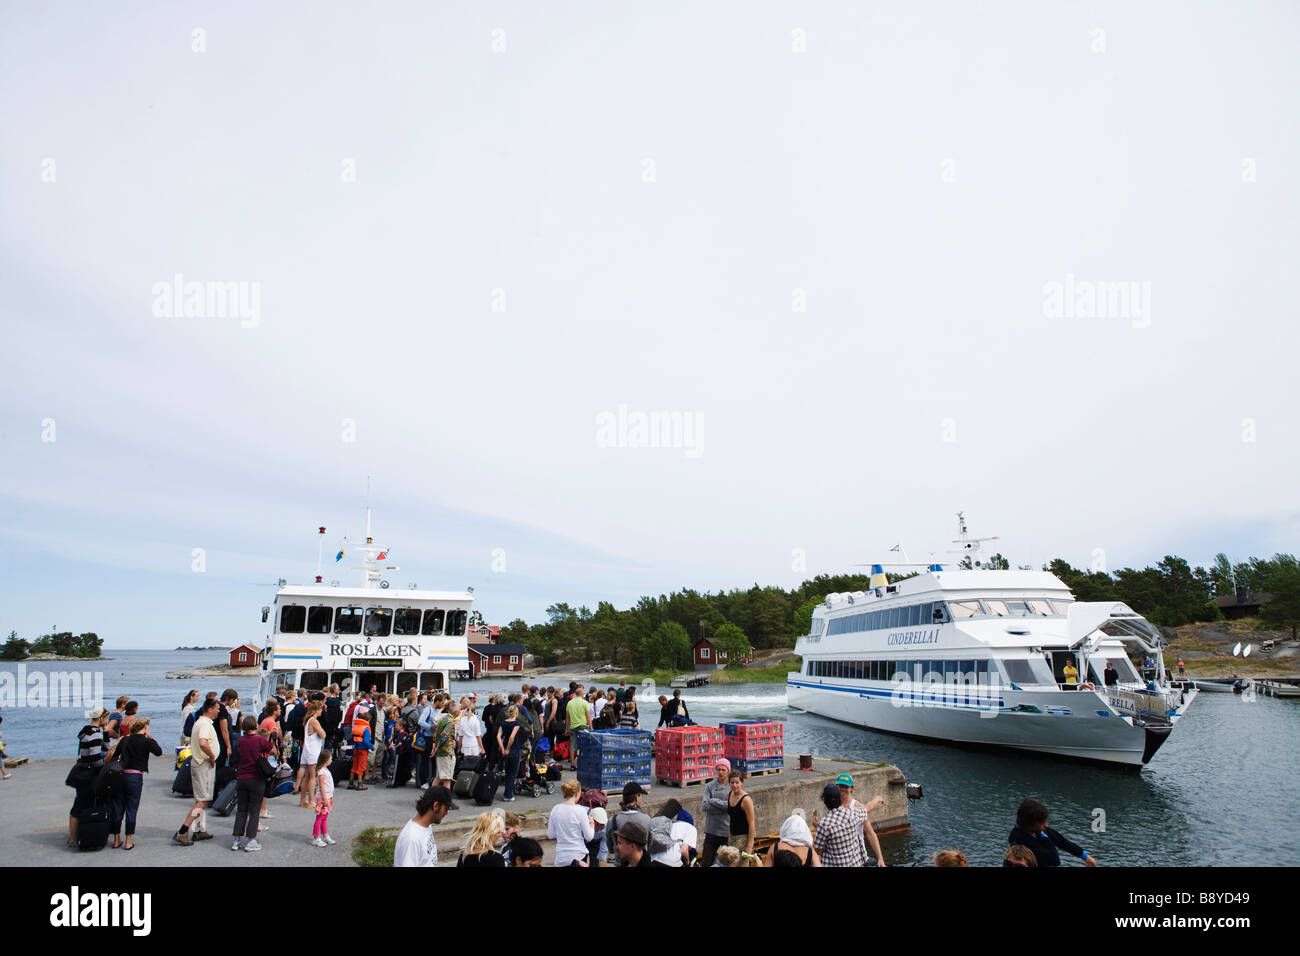 People waiting for a boat in the archipelago Sweden. Stock Photo